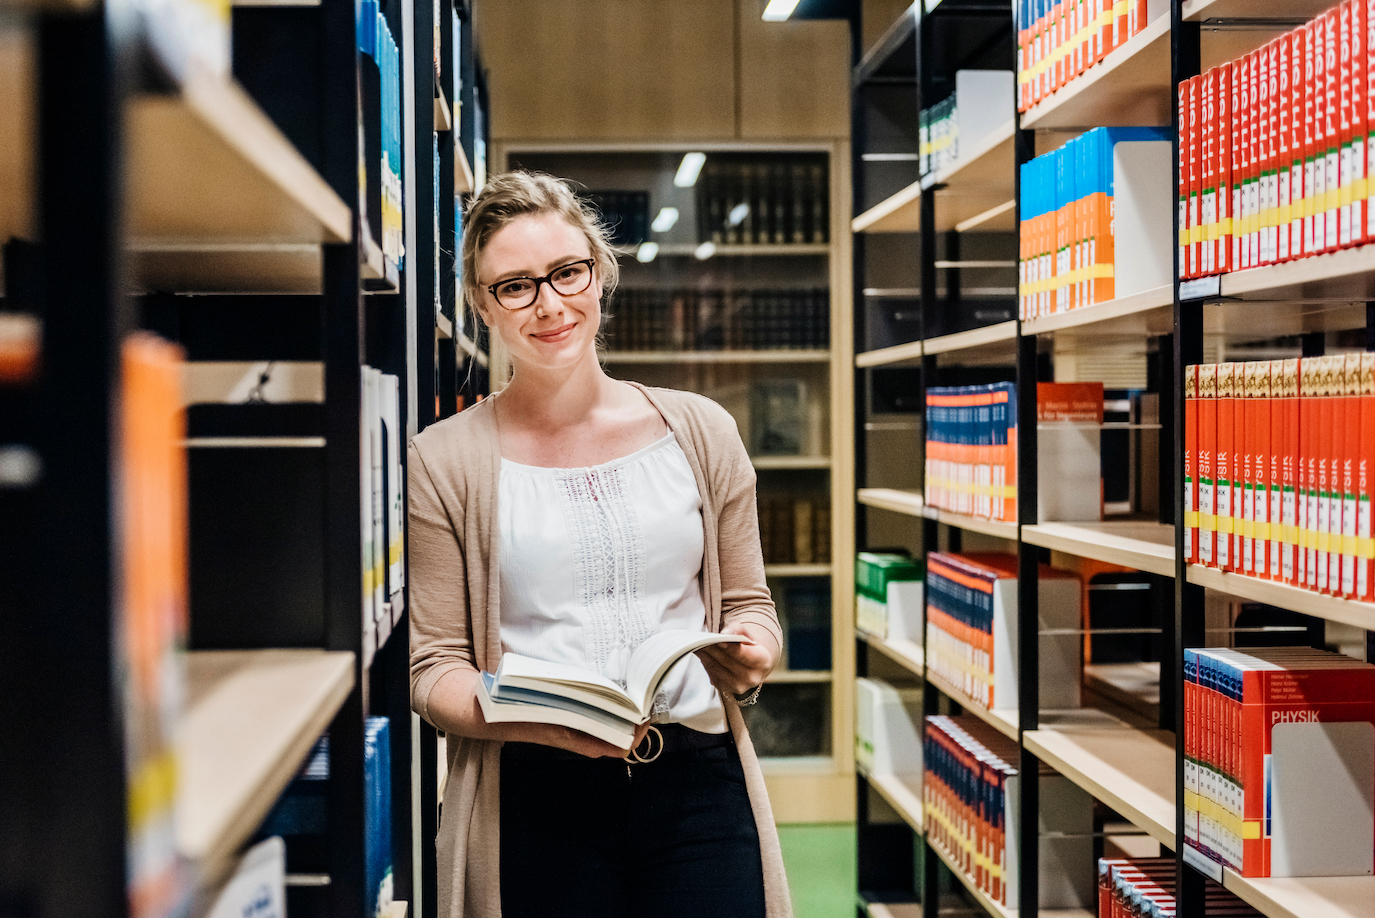 Woman smiling in library setting